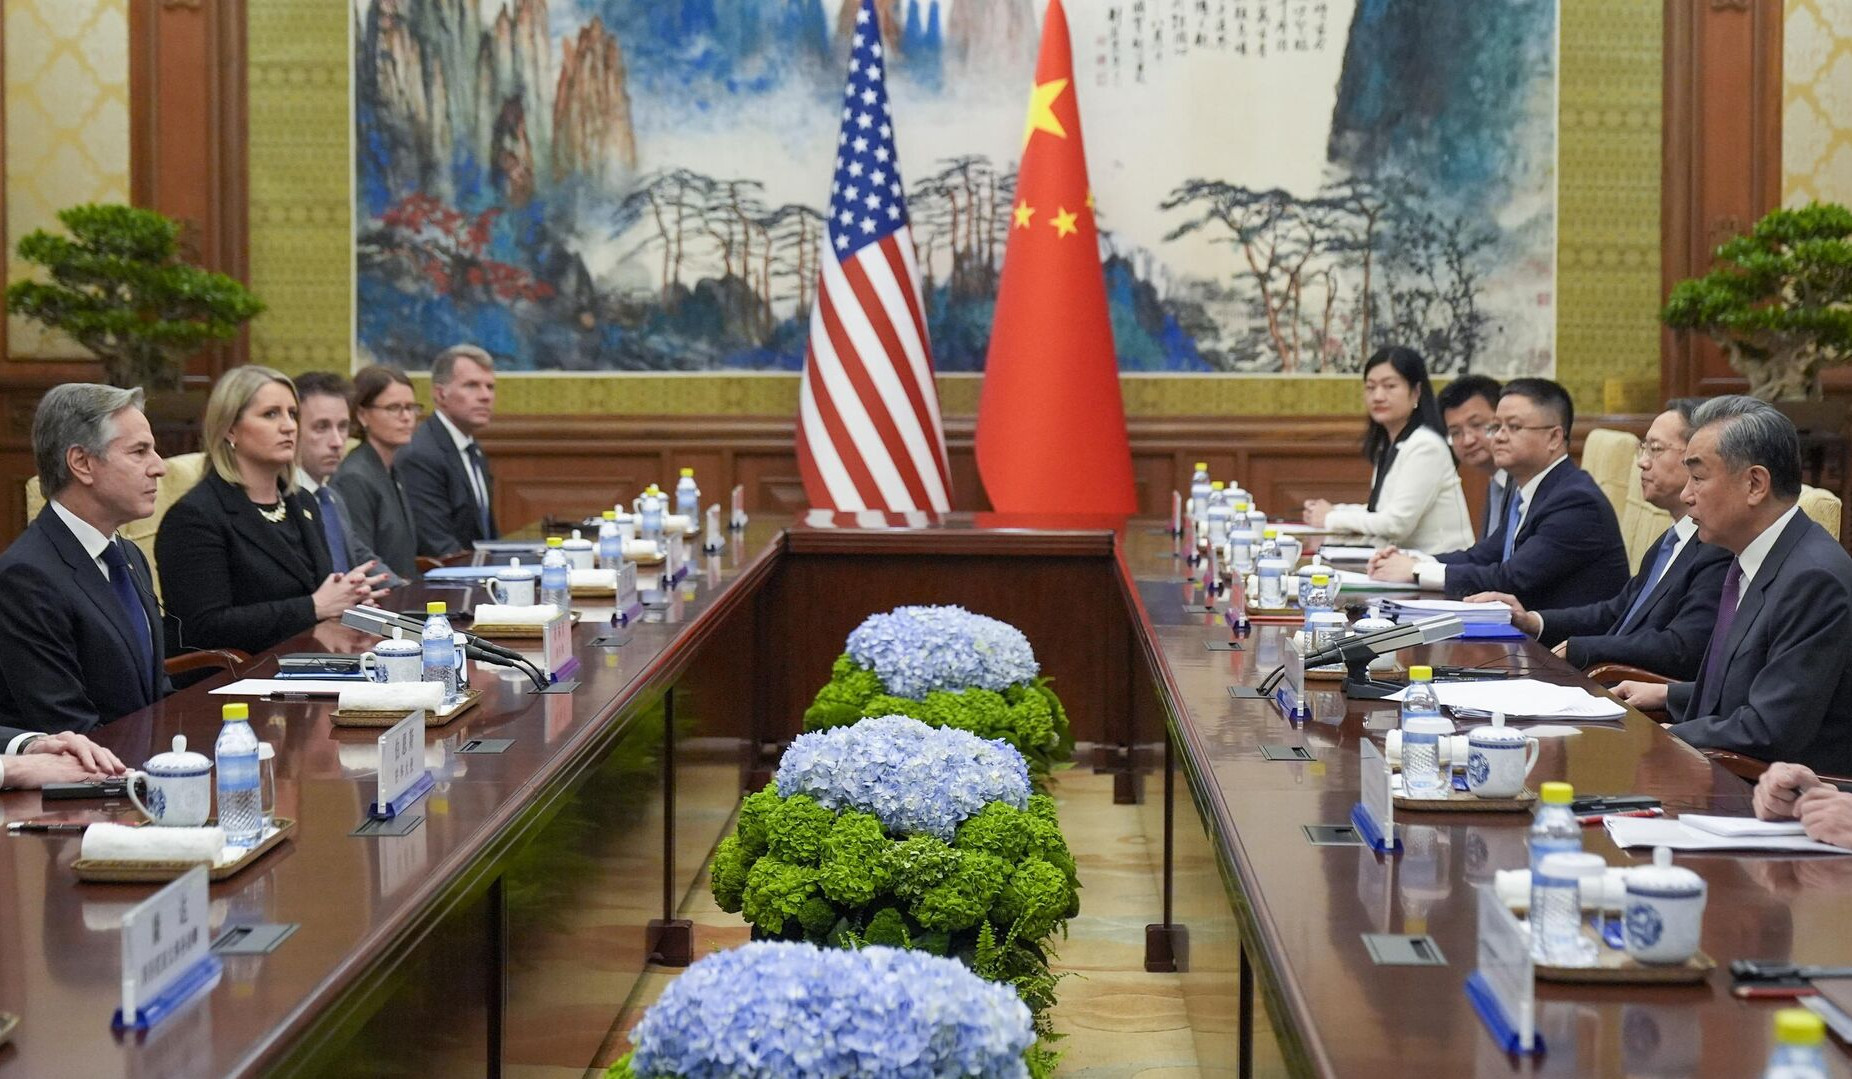 Blinken meets with Xi as US, China spar over bilateral and global issues